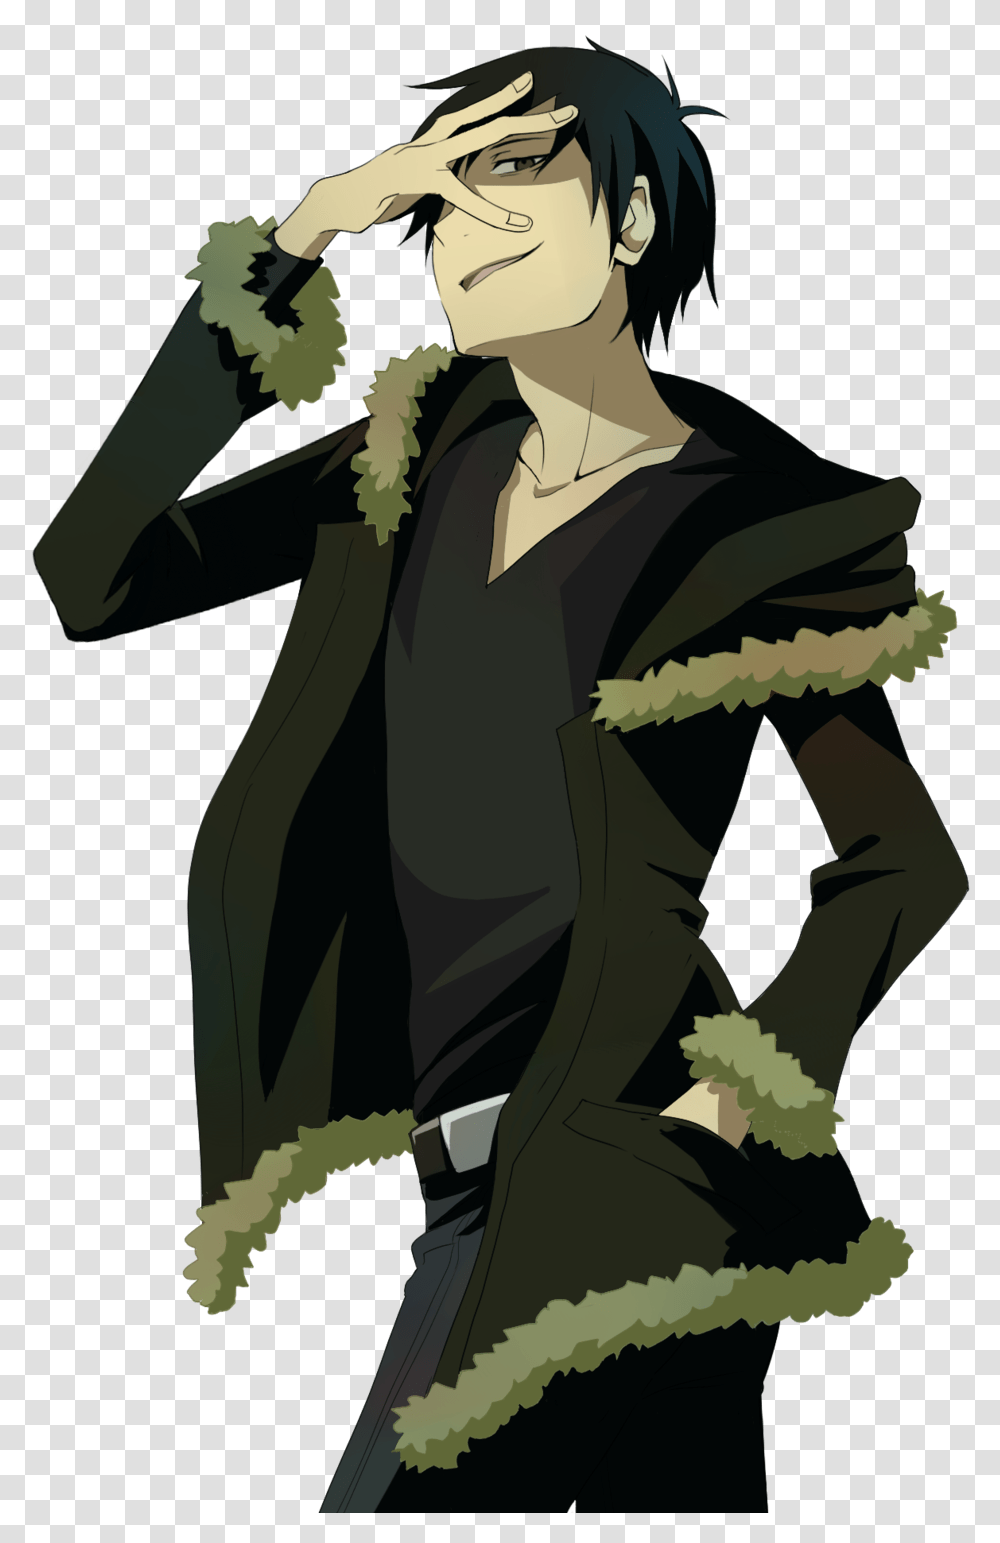 Trench Coat Anime Boy Clipart Trench Coat Izaya Izaya Orihara, Person, Clothing, Book, Silhouette Transparent Png